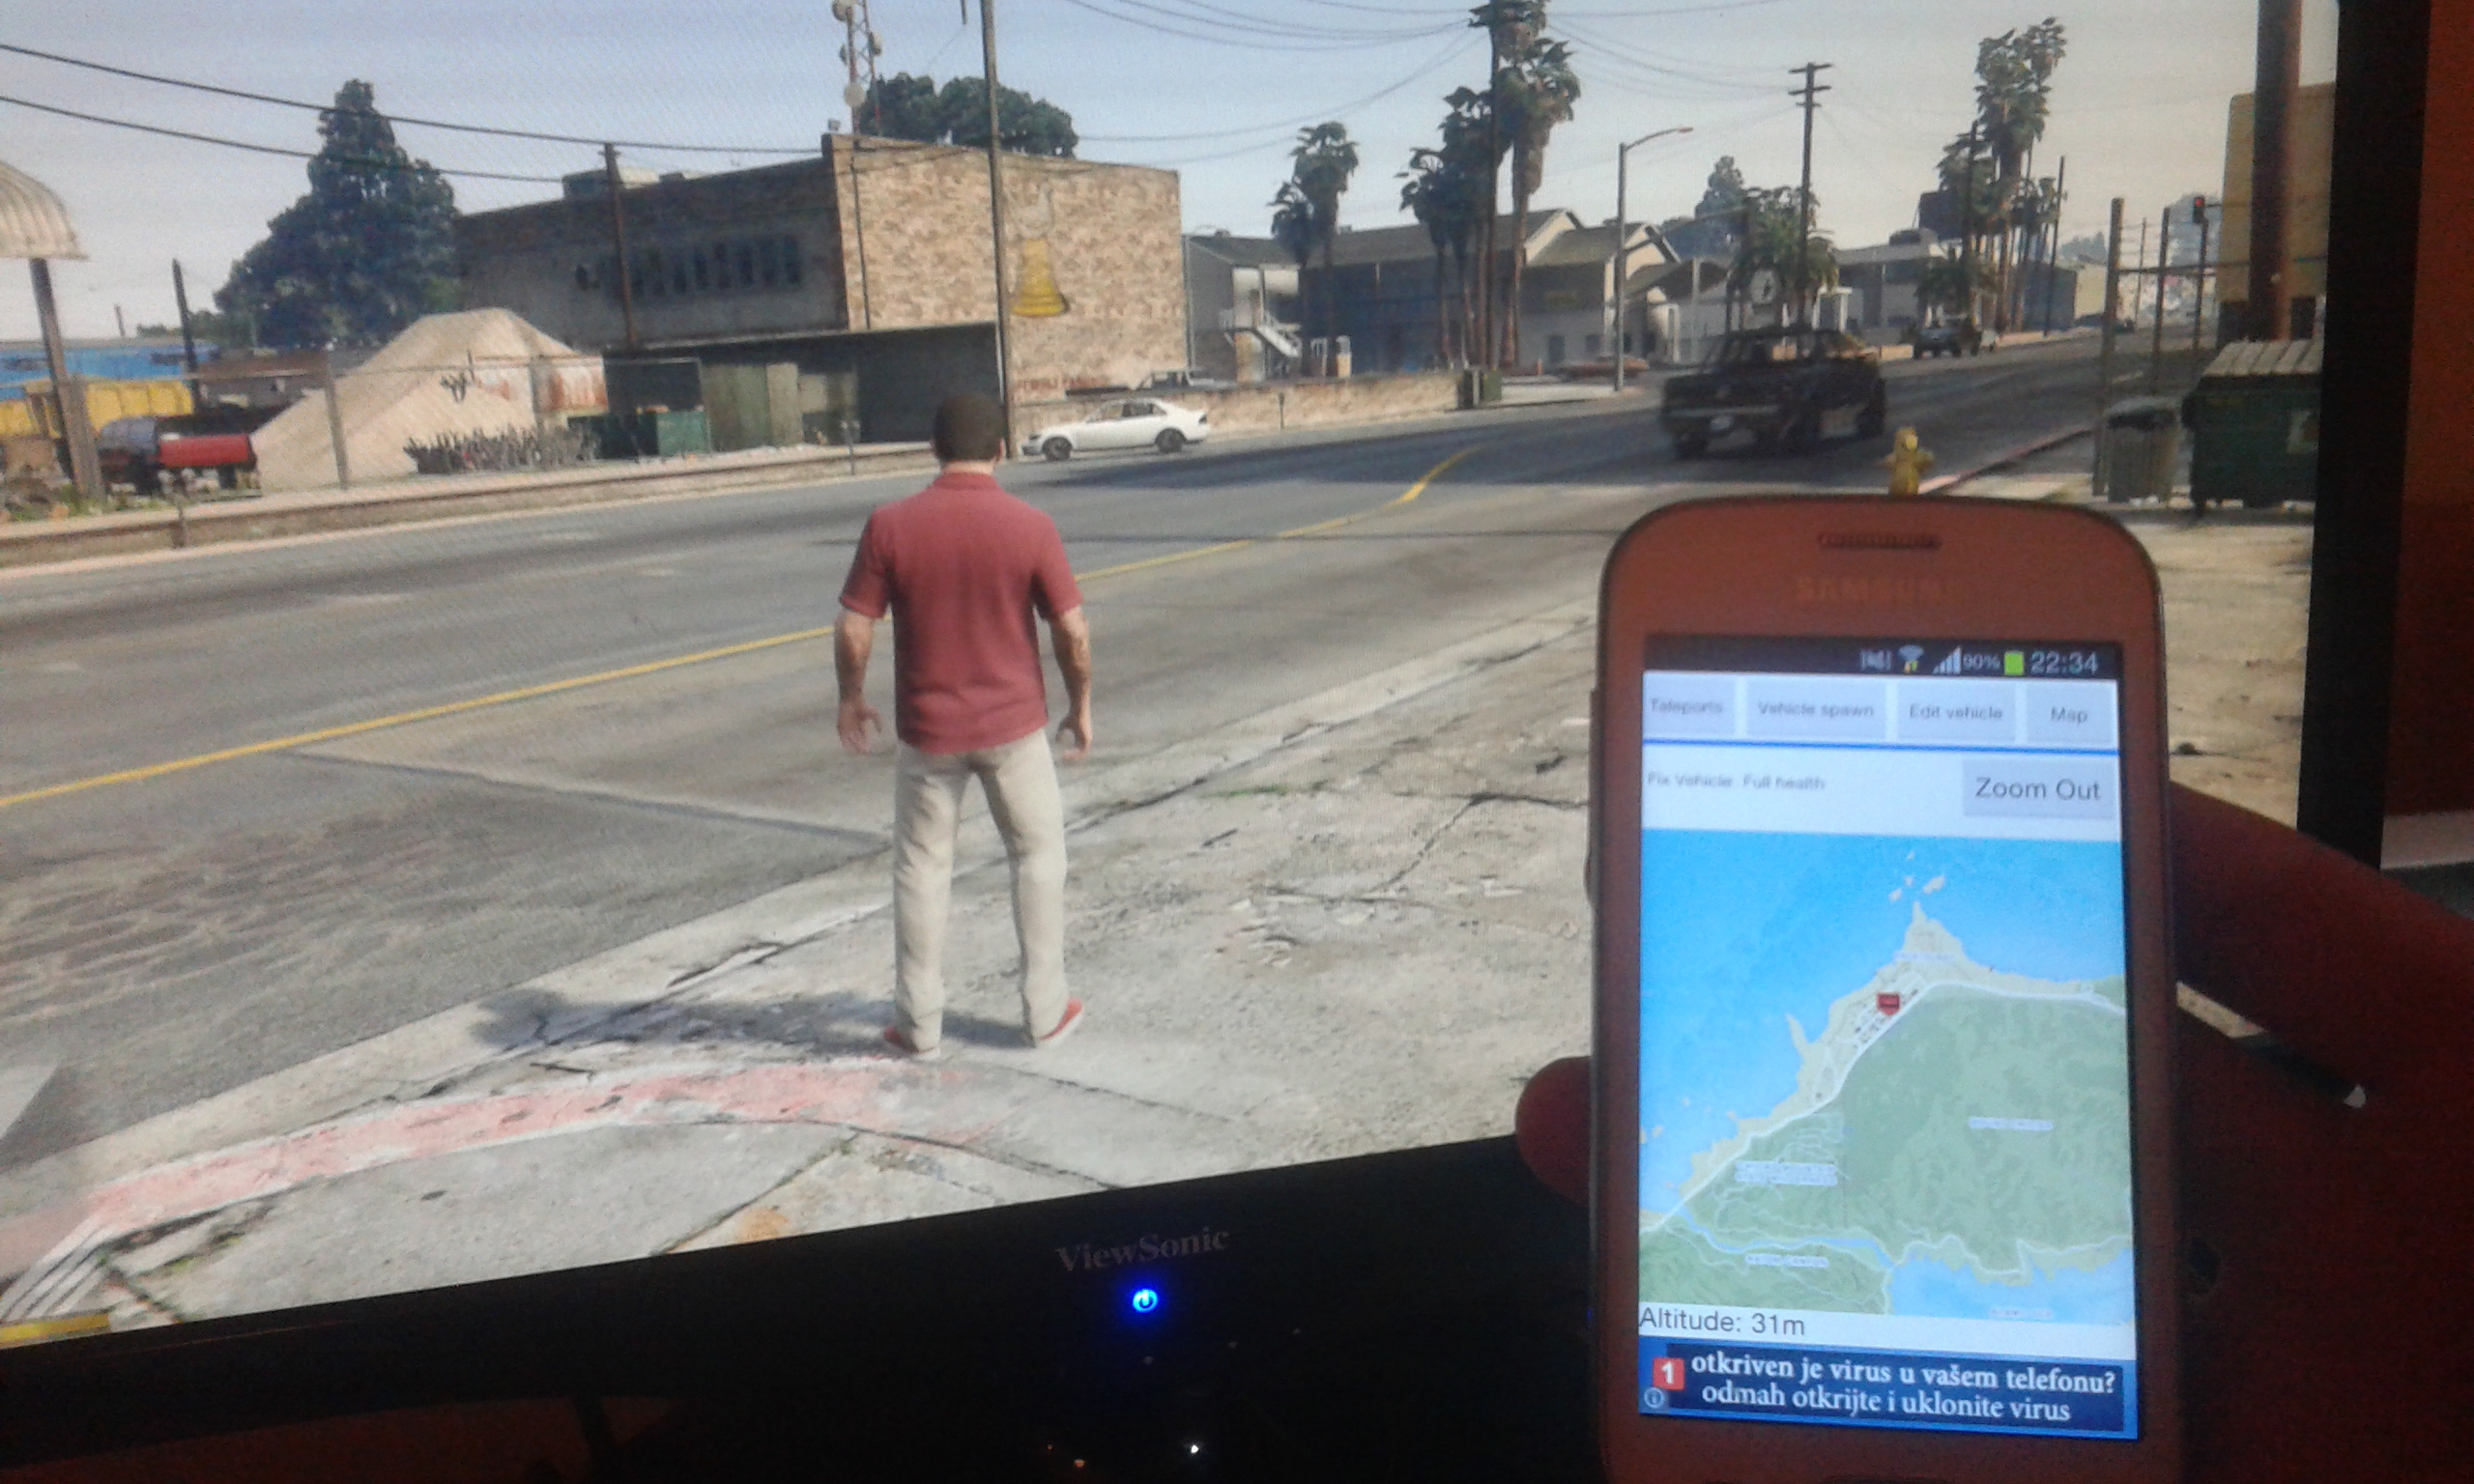 GTA 5 PC Mod: Use iPhone app to control in-game phone